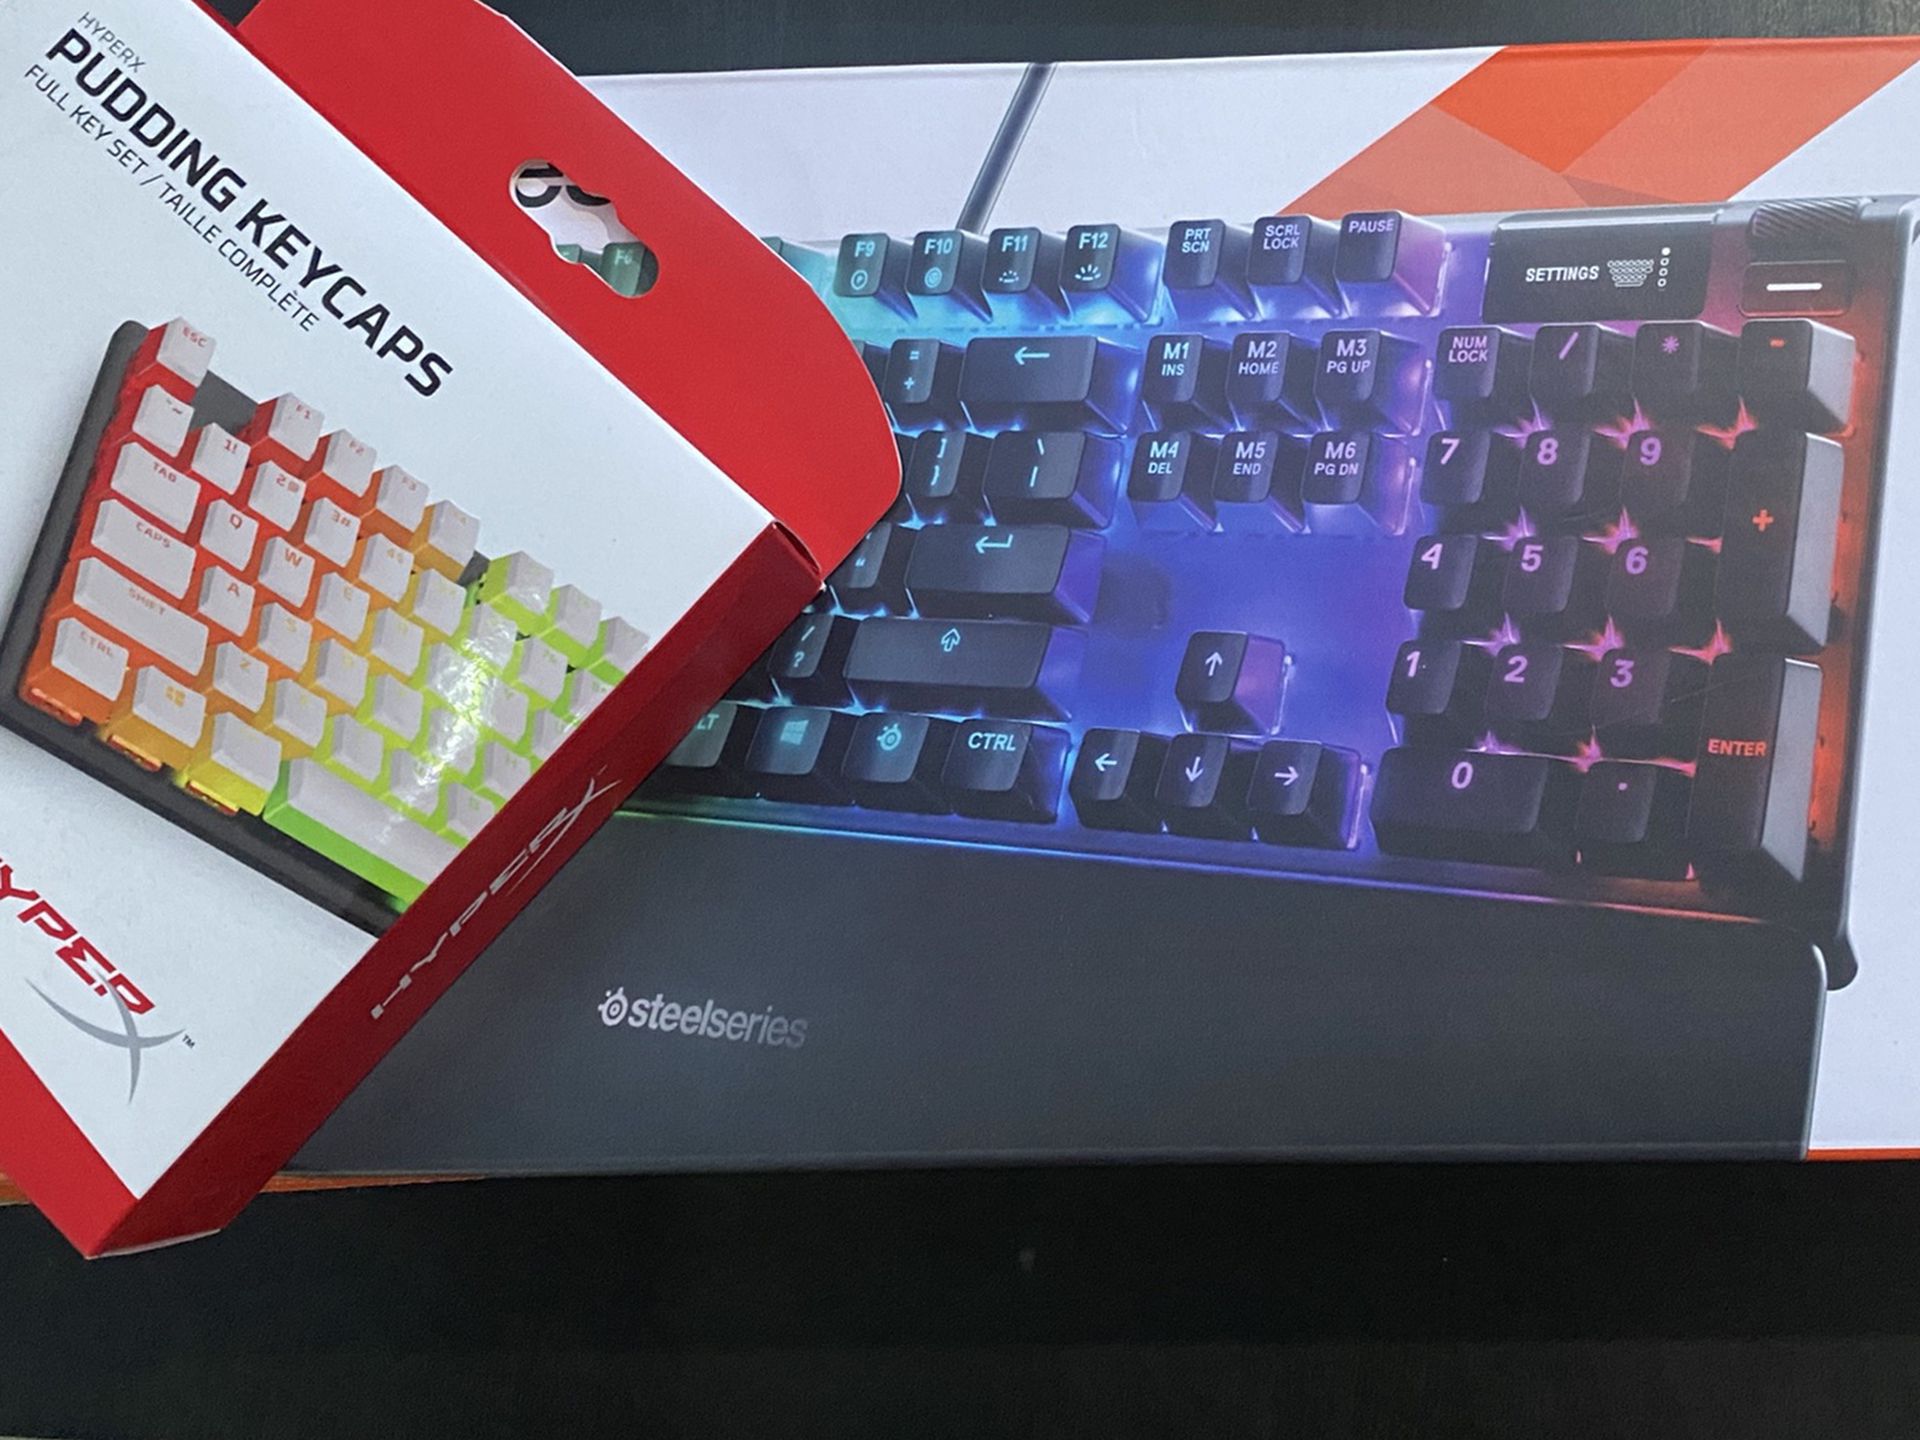 Steelseries Apex 7 Red Switches With White Hyper X Pudding Keycaps (original Keycaps Are Included)